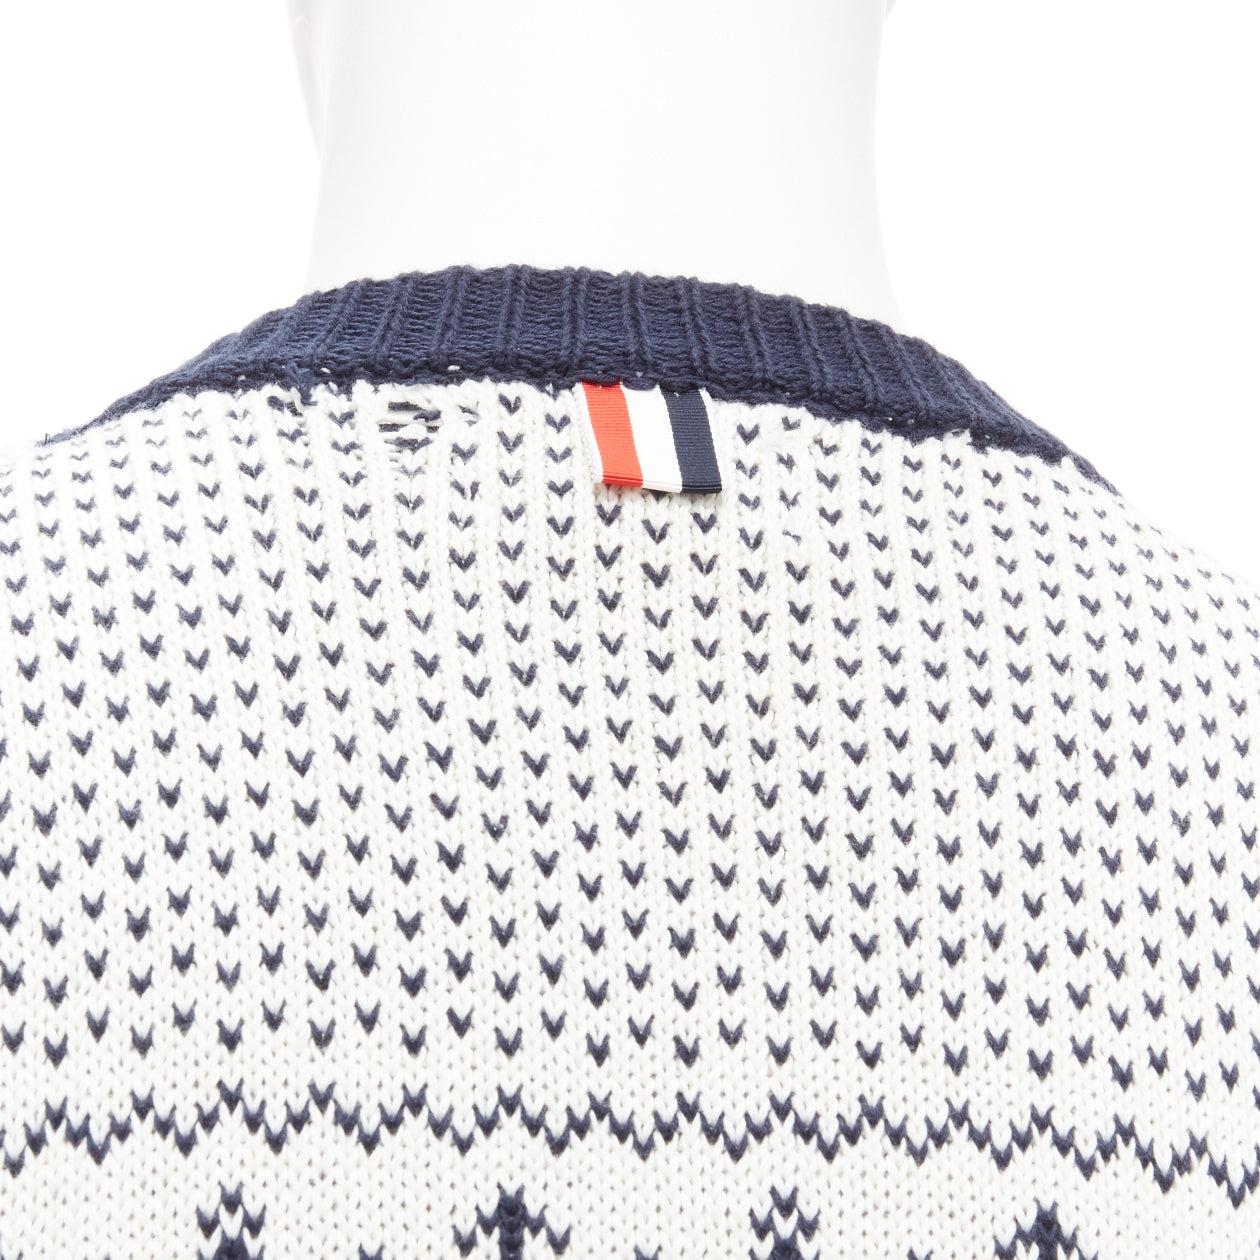 THOM BROWNE off white navy nautical octopus intarsia button shoulder ringer sweater SZ.3 L
Reference: JSLE/A00047
Brand: Thom Browne
Designer: Thom Browne
Material: Cotton
Color: Off White, Navy
Pattern: Abstract
Closure: Button
Extra Details: